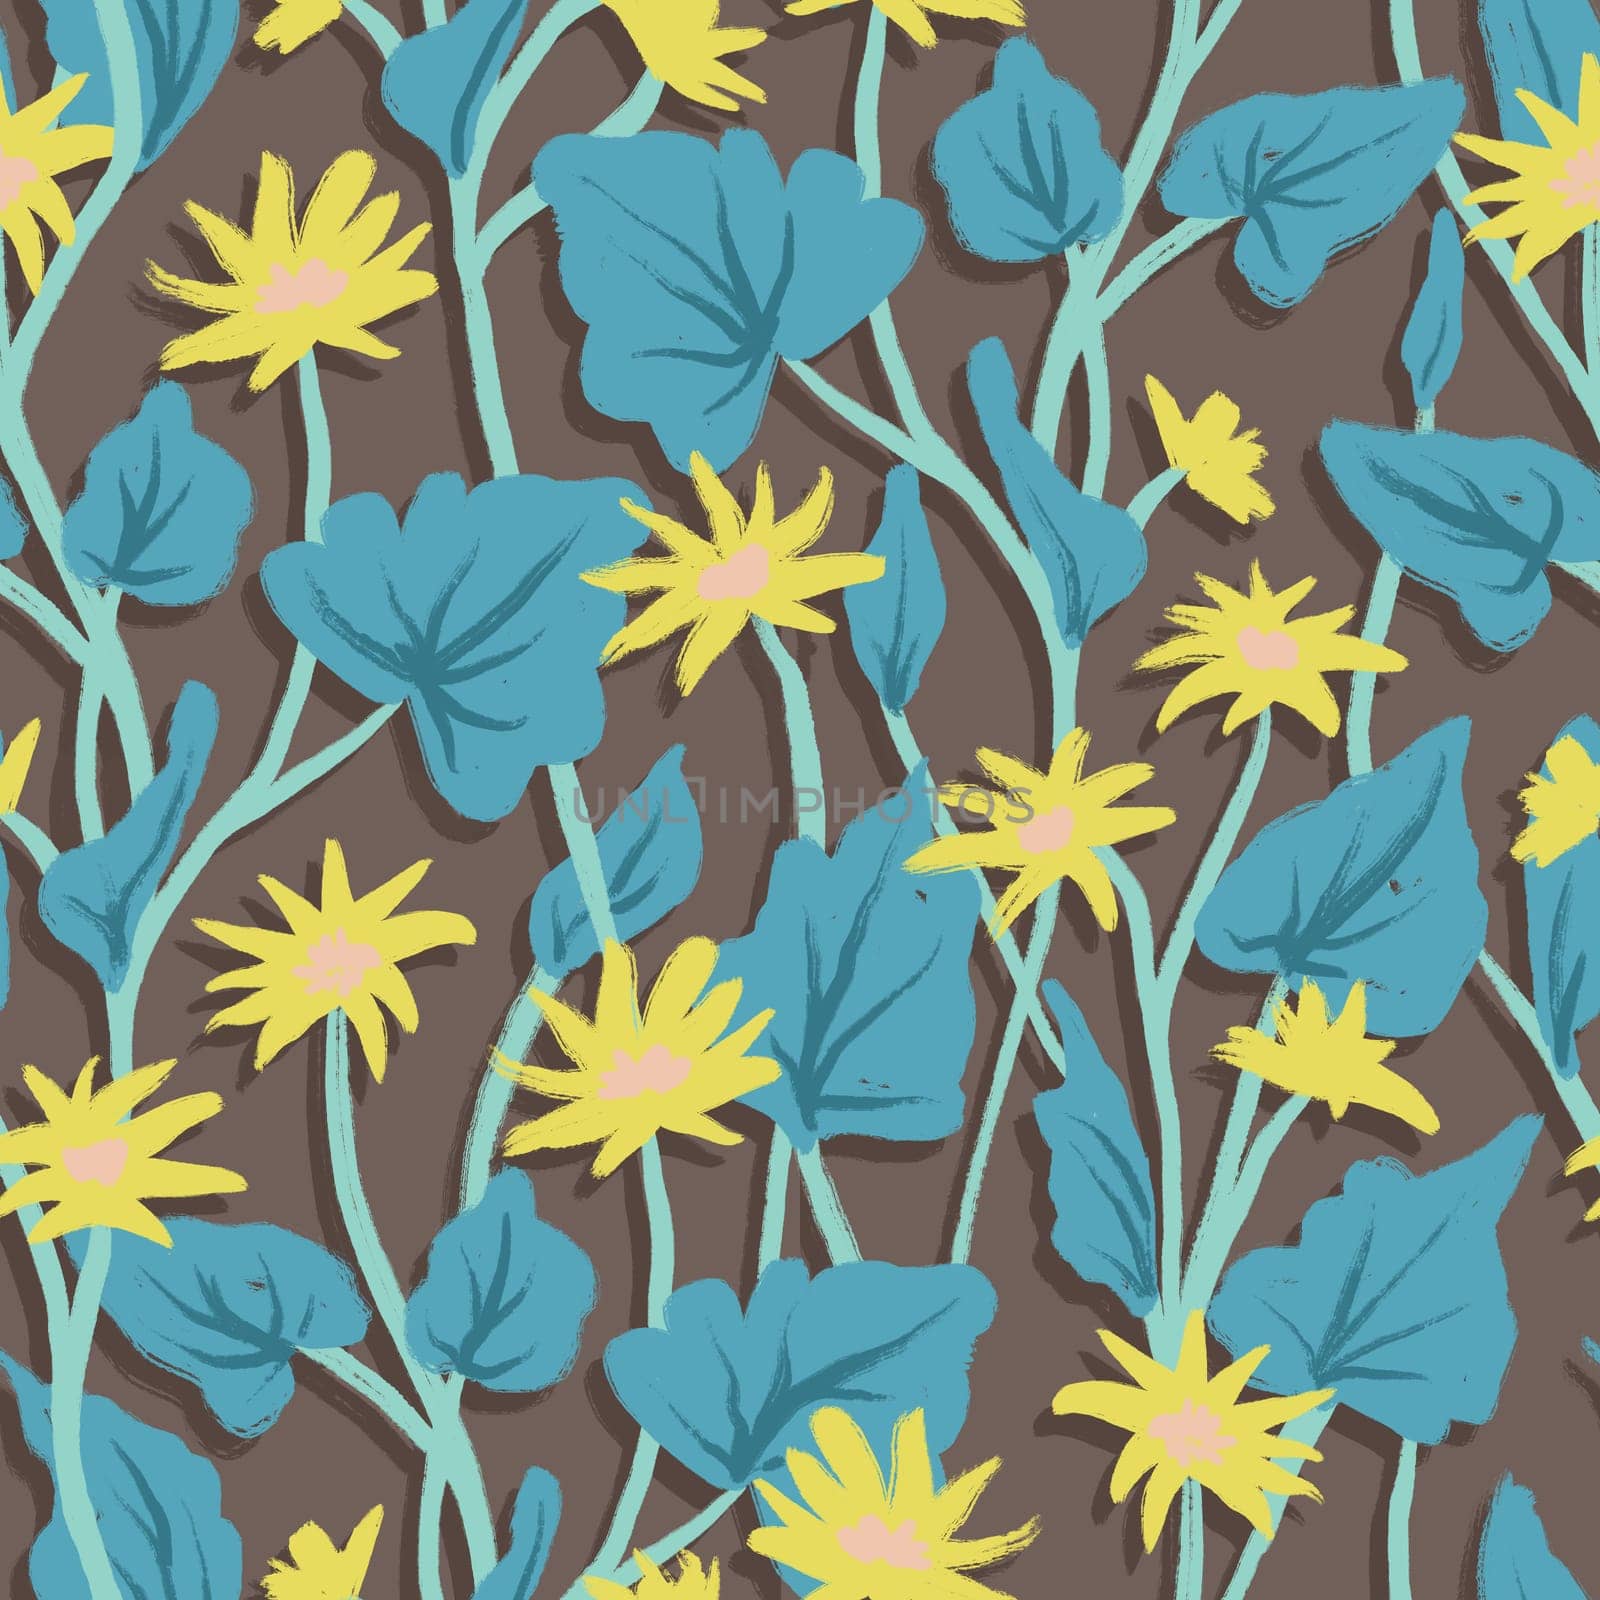 Hand drawn seamless pattern with yellow lesser celadine flower with blue leaves. Wildflower floral pastel calm print, garden forest wood plant, nature small buttercup bloom blossom